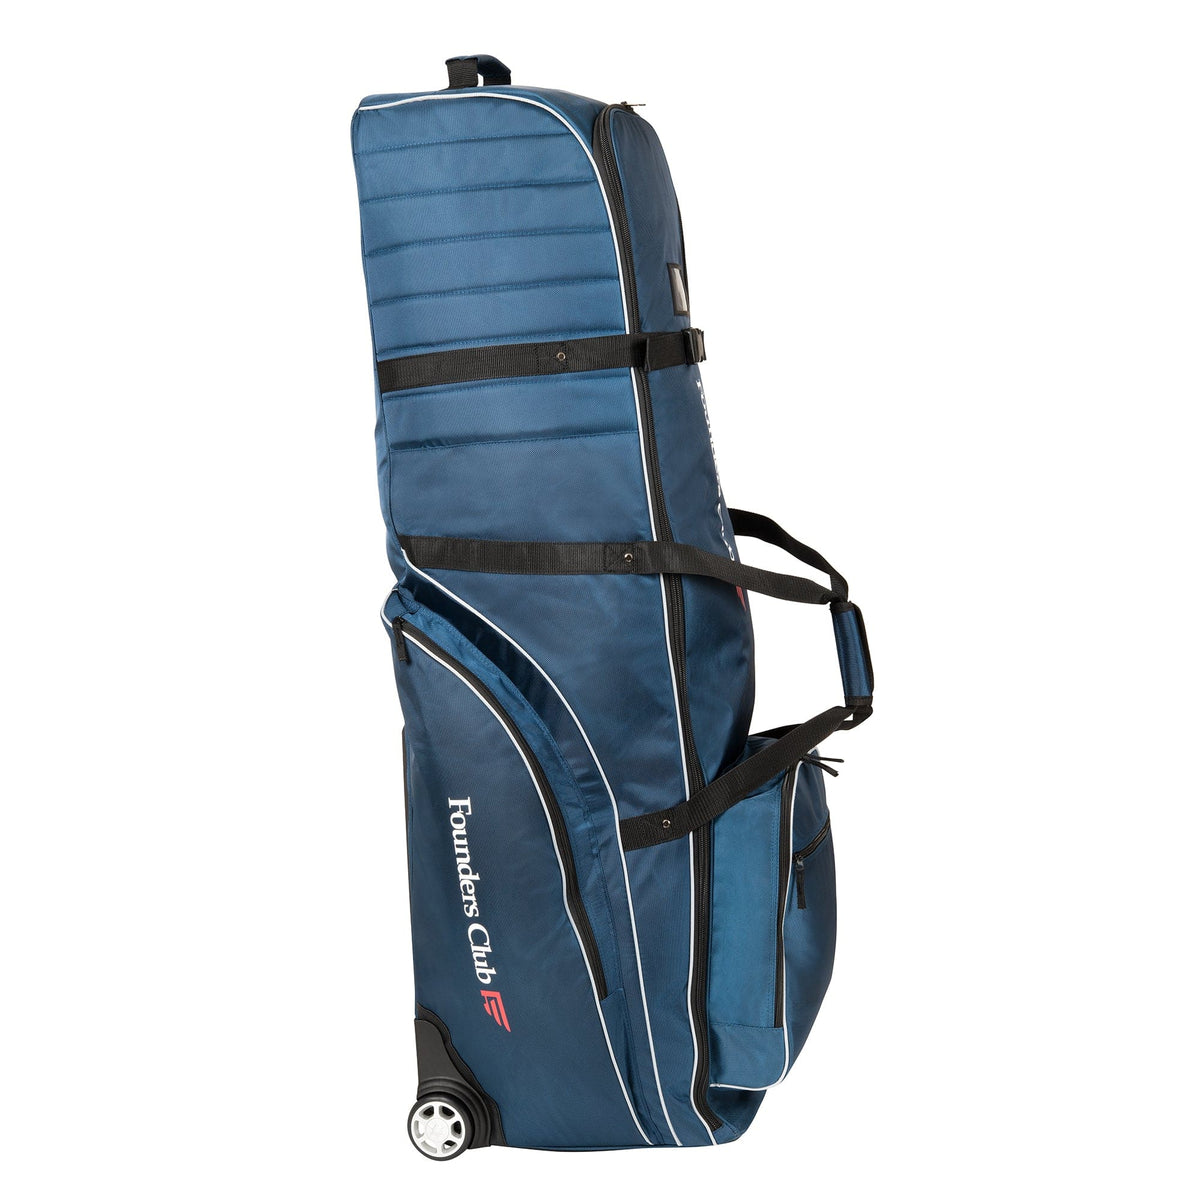 Founders Club Getaway Padded Golf Club Travel Bag Cover with Wheels